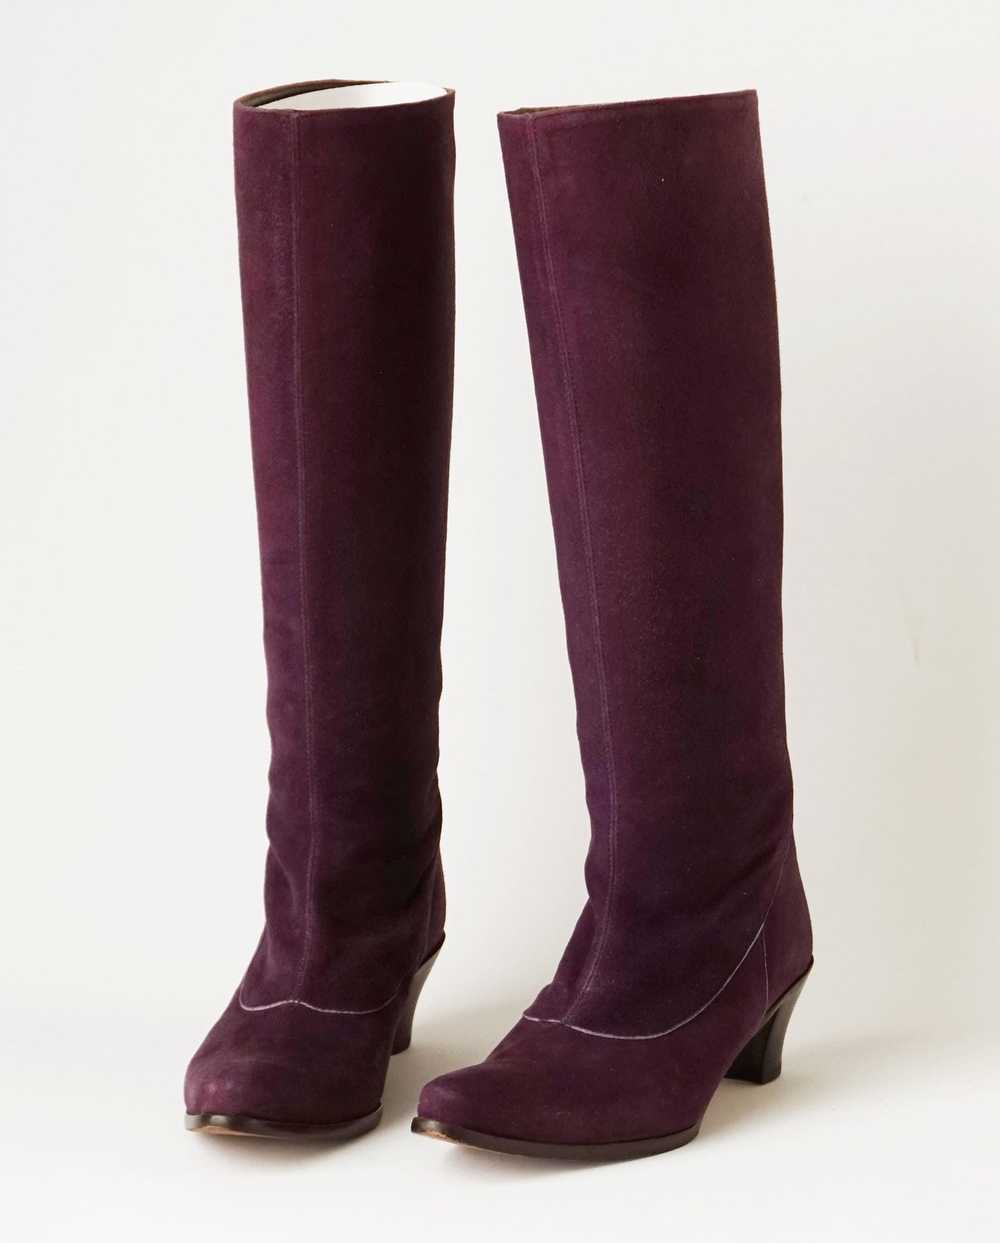 Anna Sui Anna Sui Purple Suede Leather Long Boots - image 4